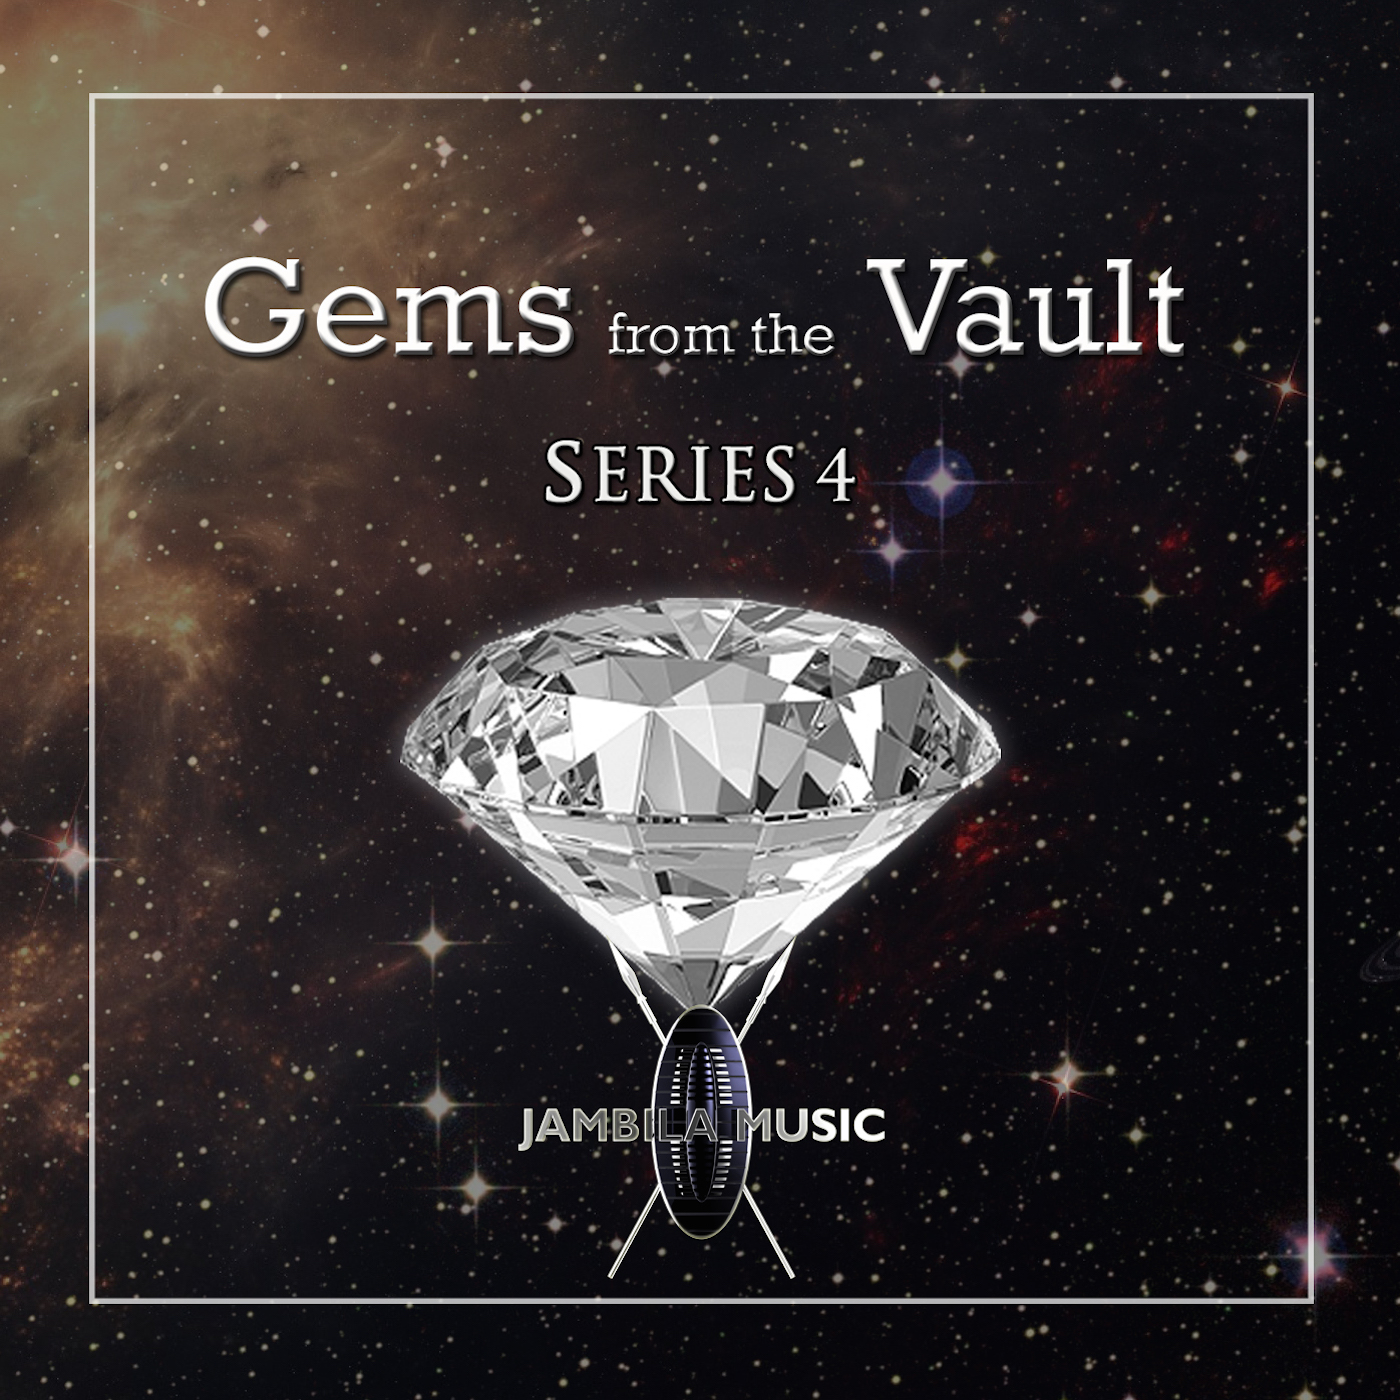 Gems from the Vault Series 4